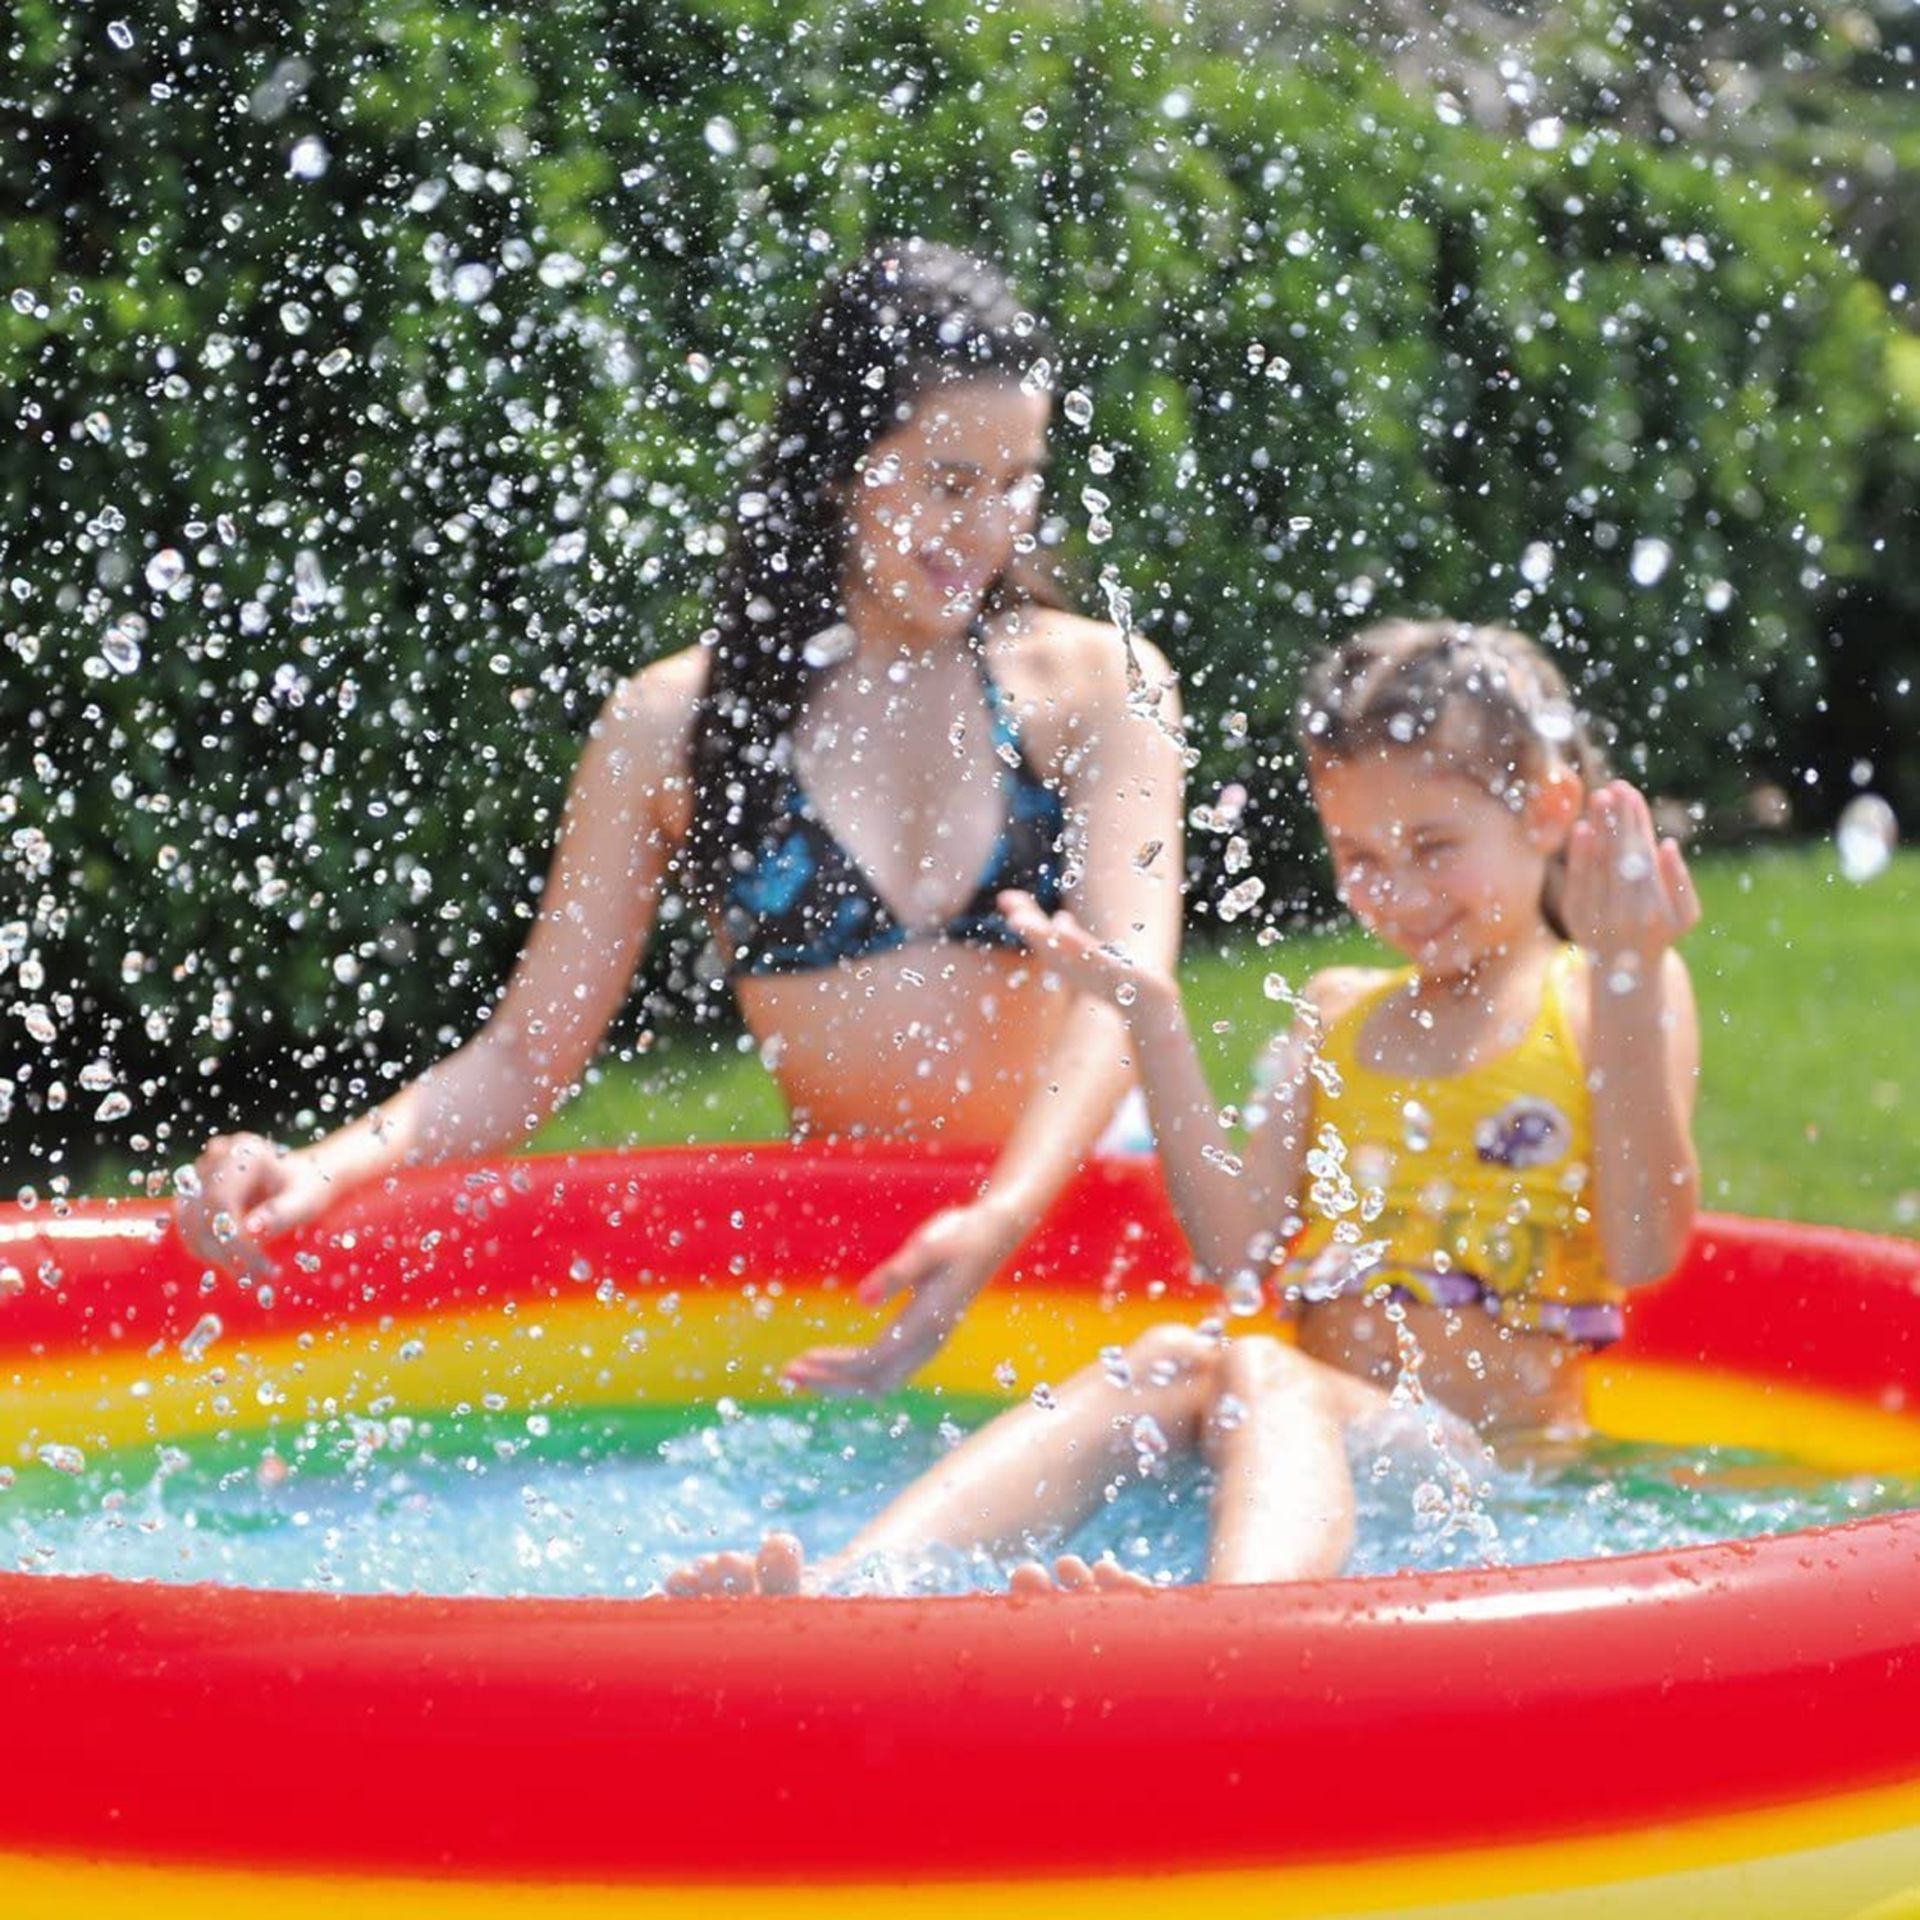 12 X BRAND NEW SUN CLUB 3 RING RAINBOW INFLATABLE PADDLING POOL (100 CM X 22 CM ) RRP £16.99 - TOTAL - Image 2 of 2